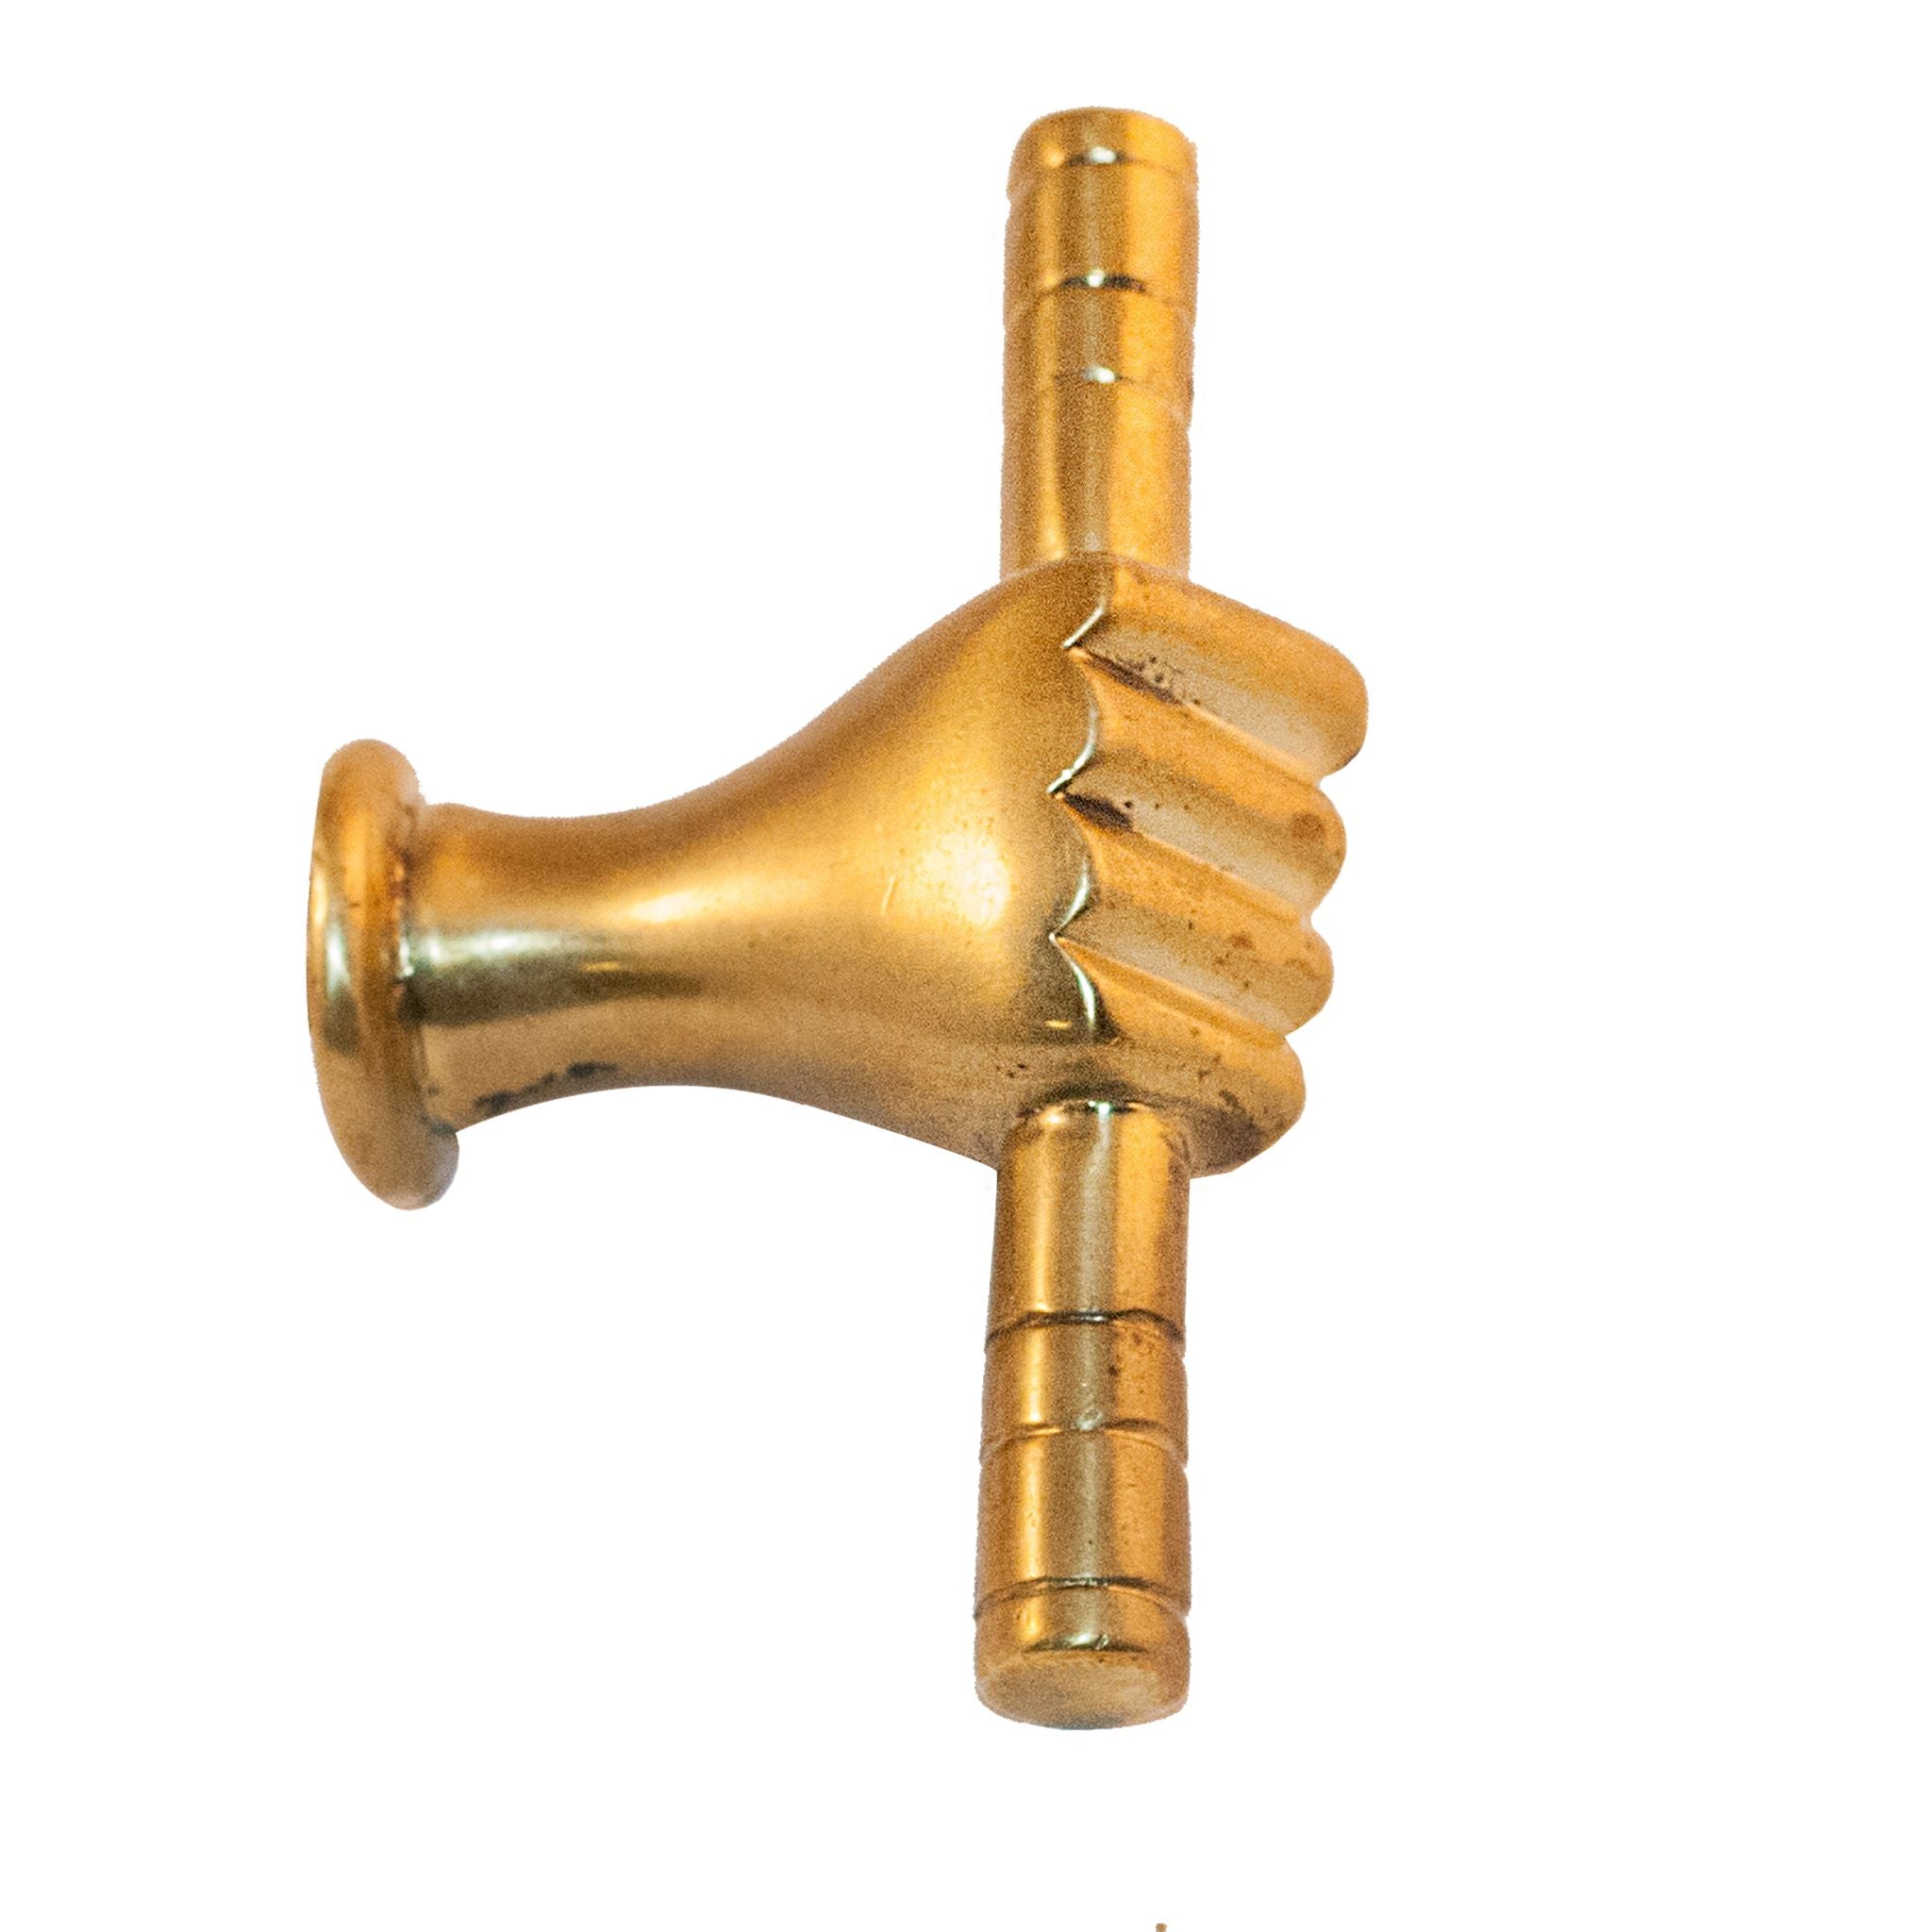 An image of a brass hand-shaped knob against a neutral background. The knob depicts detailed hand designs, adding a unique and artistic touch to furniture or drawers.